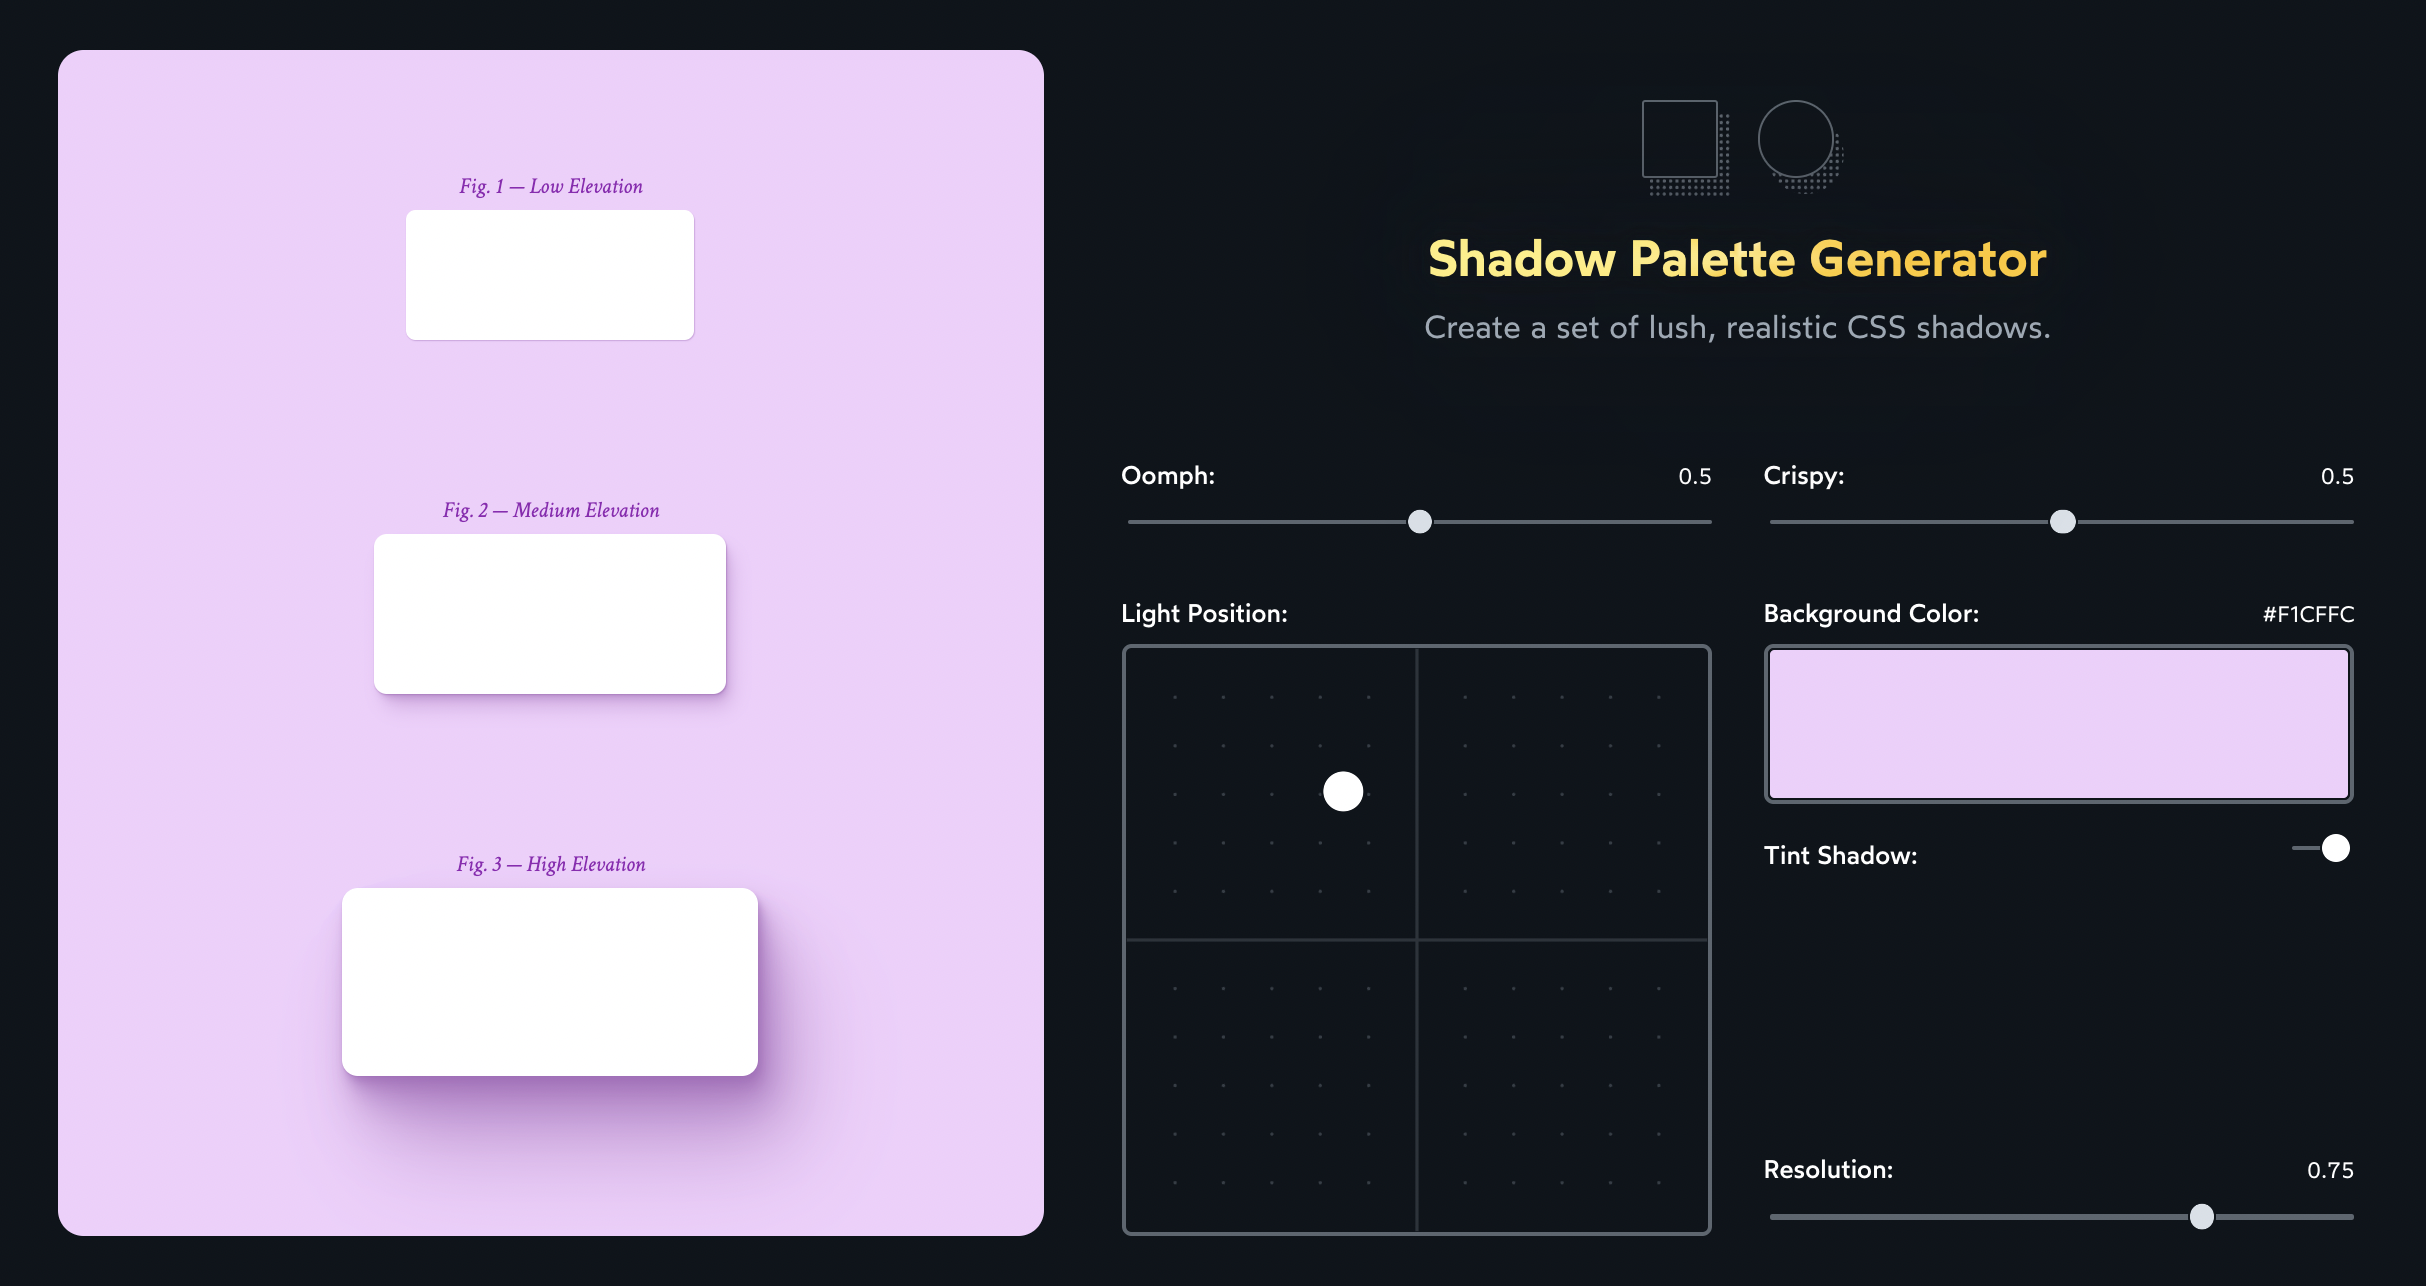 Introducing “Shadow Palette Generator”, a tool to help you generate CSS  box-shadow values